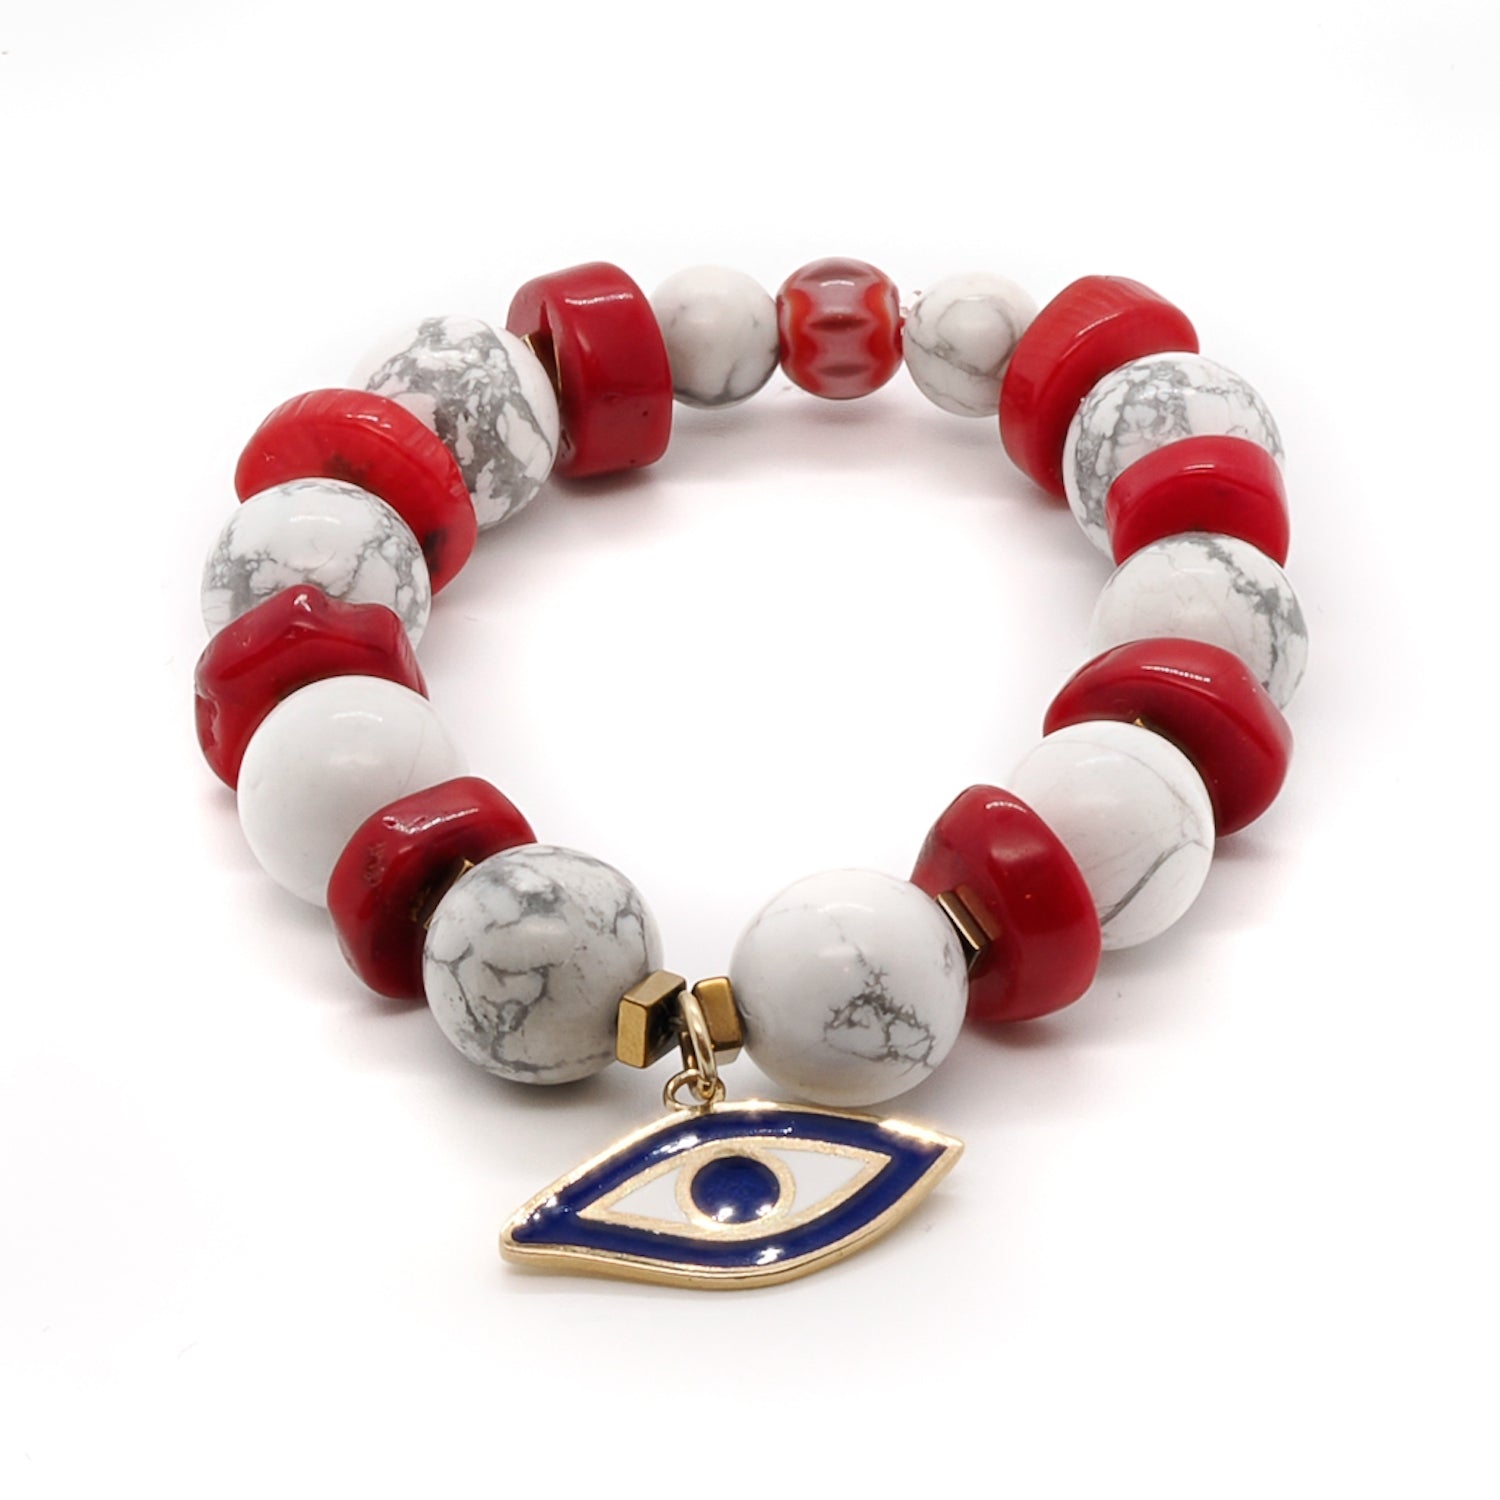 Find inner peace and protection with the Spiritual Beads Evil Eye Bracelet, featuring white howlite and a sterling silver evil eye charm.